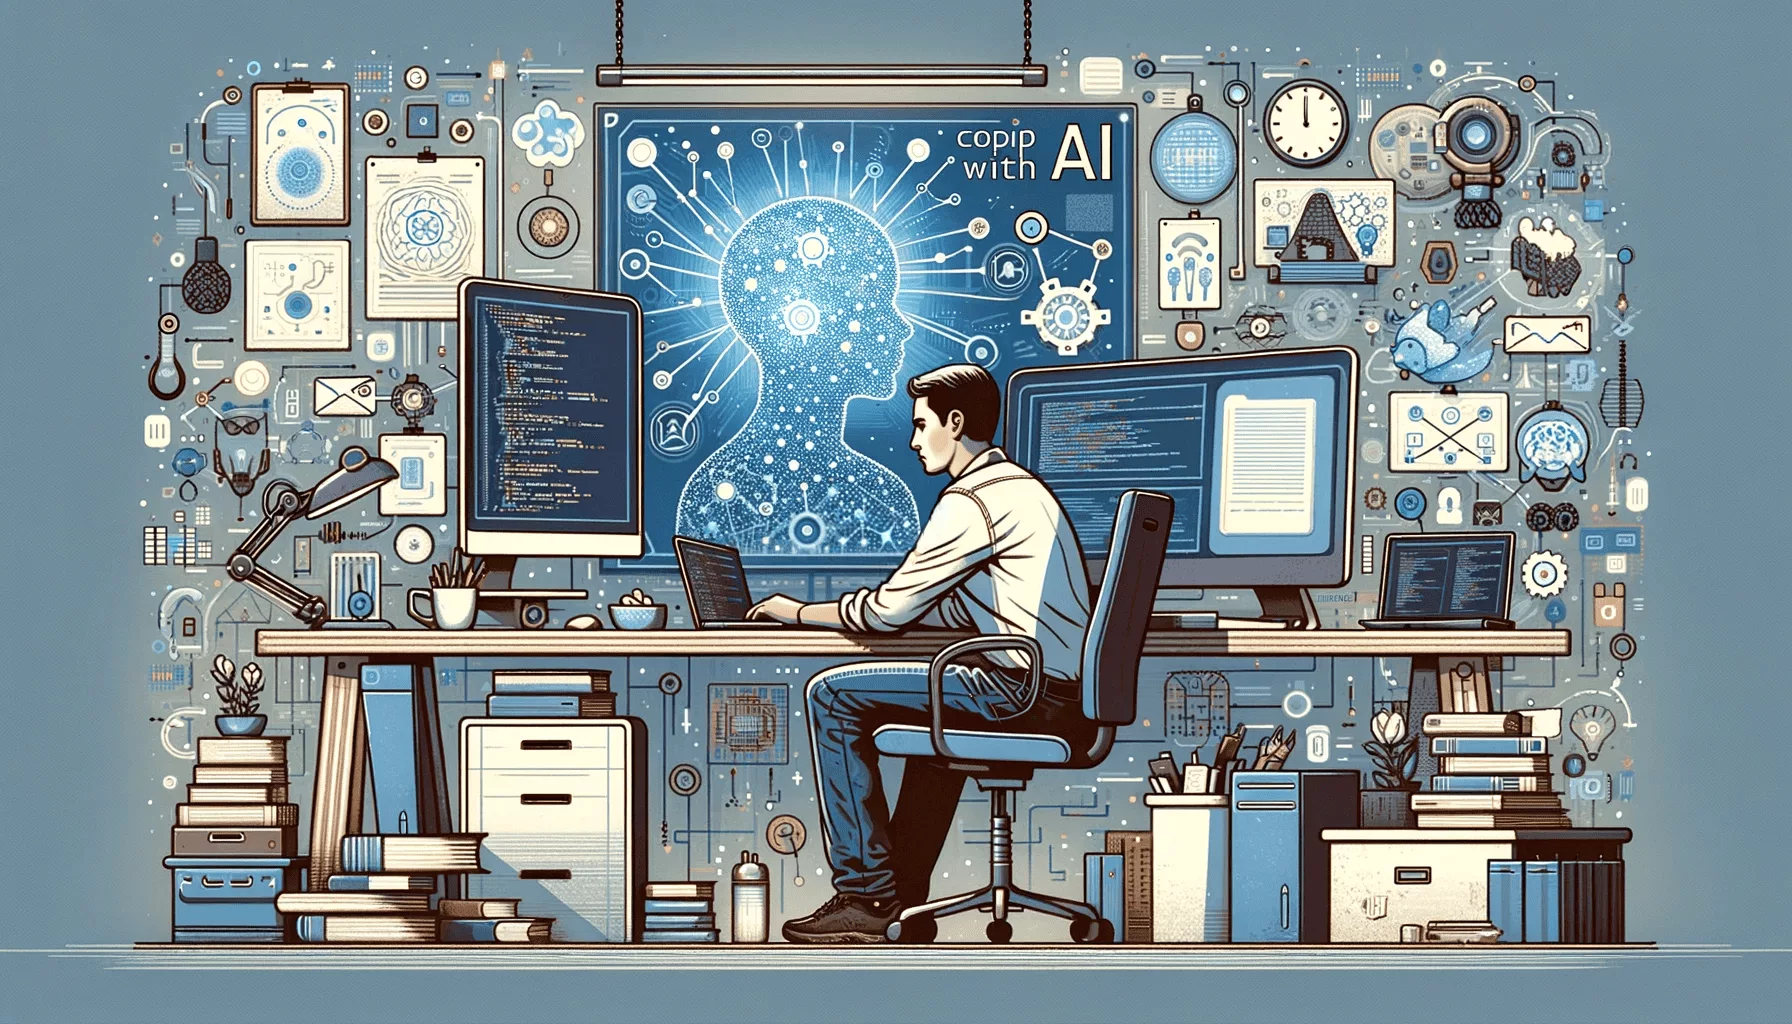 A man is sitting at a desk with a computer in front of him, coping with AI.